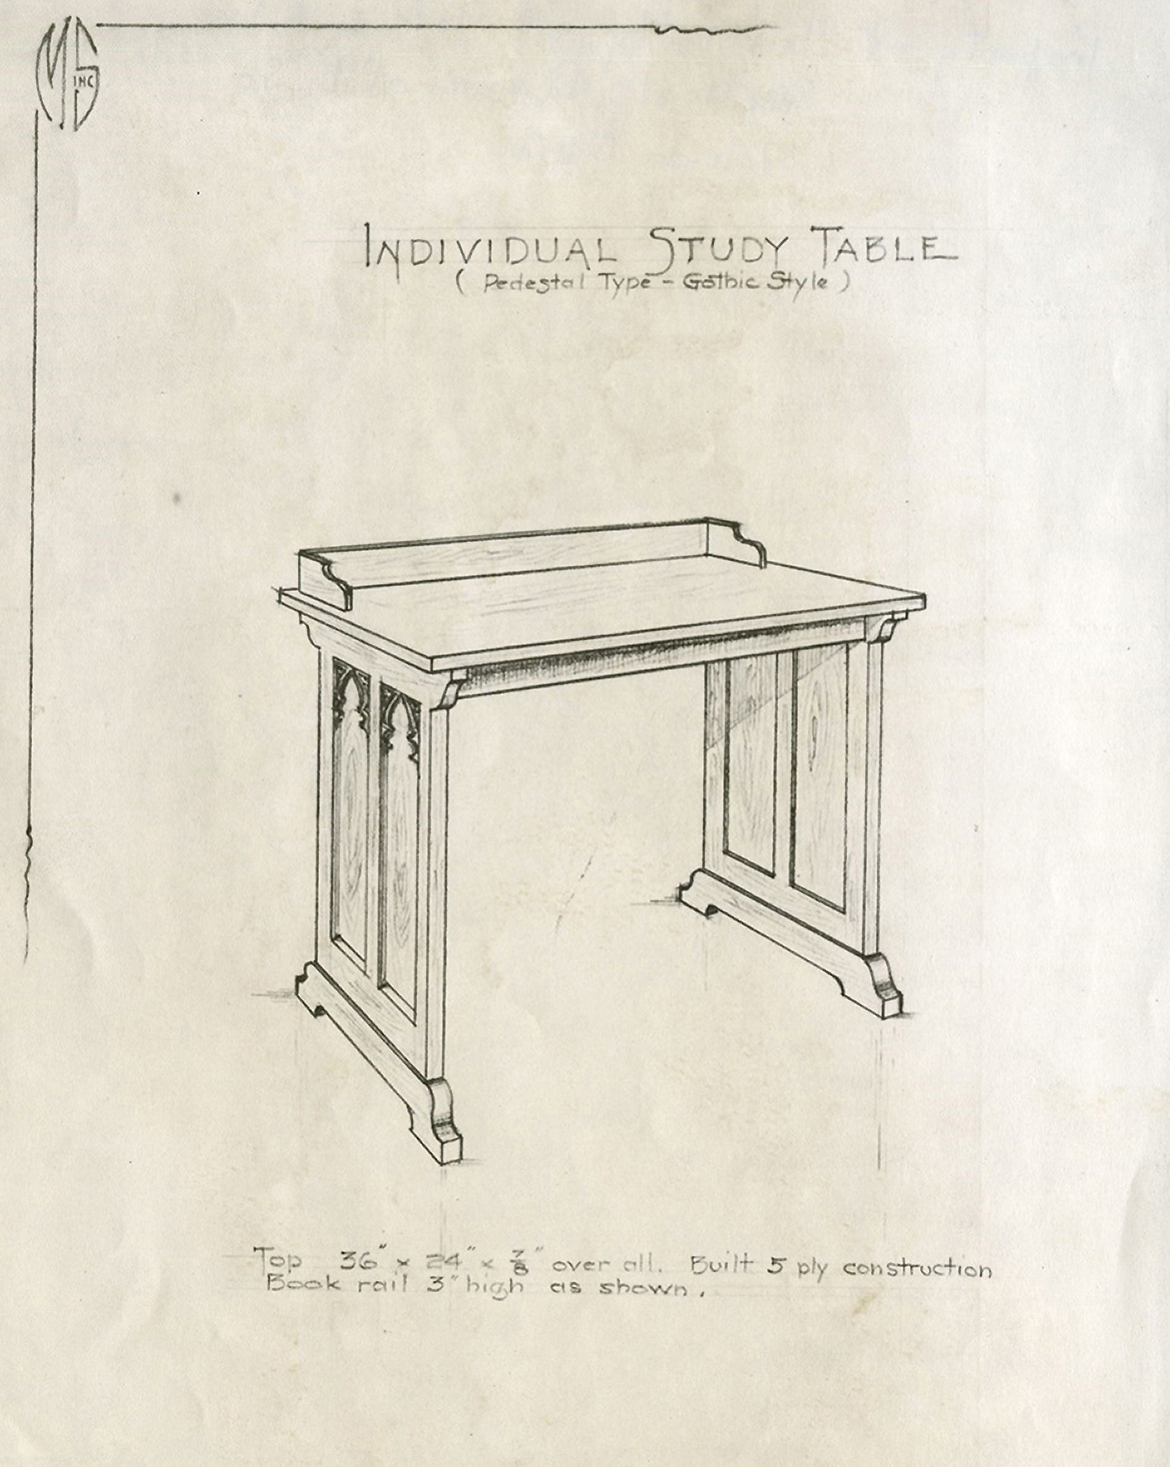 Individual Study Table (Pedestal Style - Gothic Style), drawing